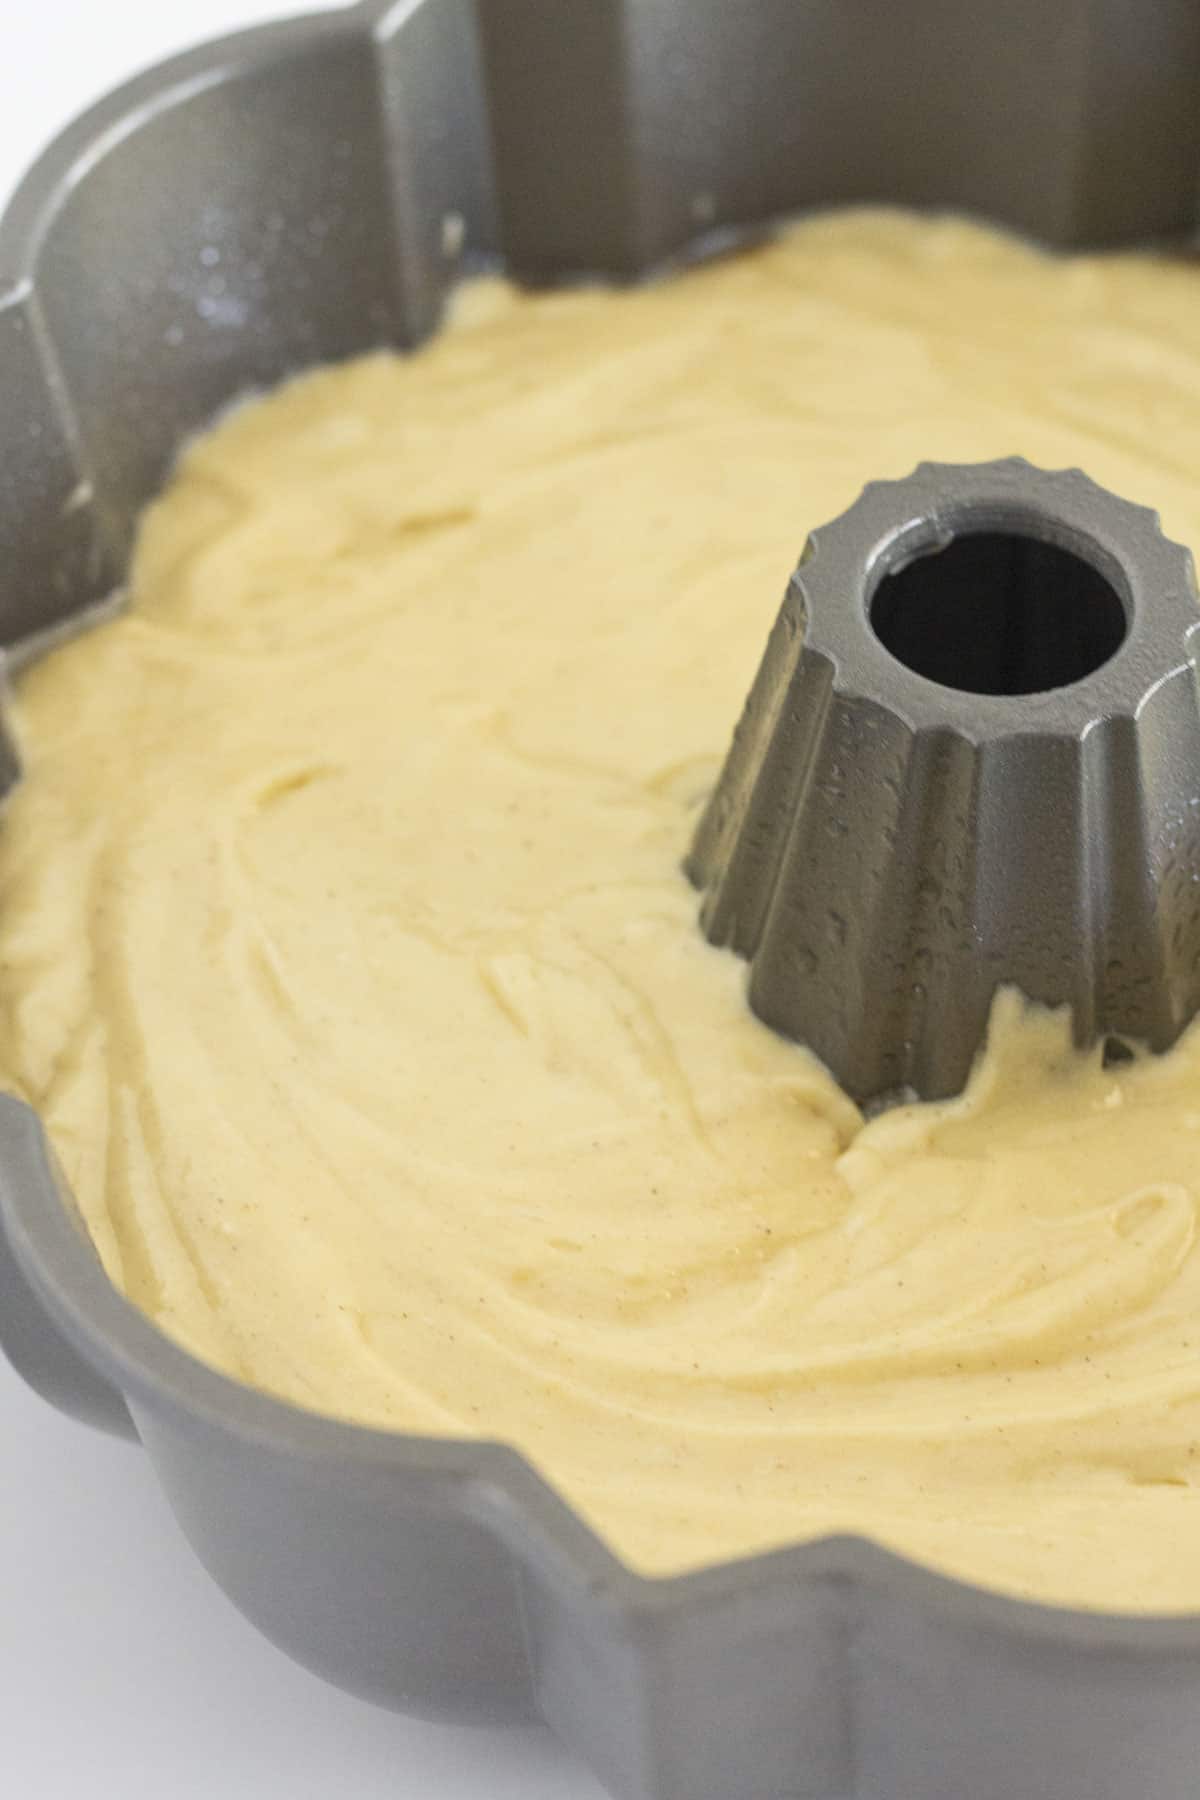 Pound cake batter in an even layer in a bundt pan.